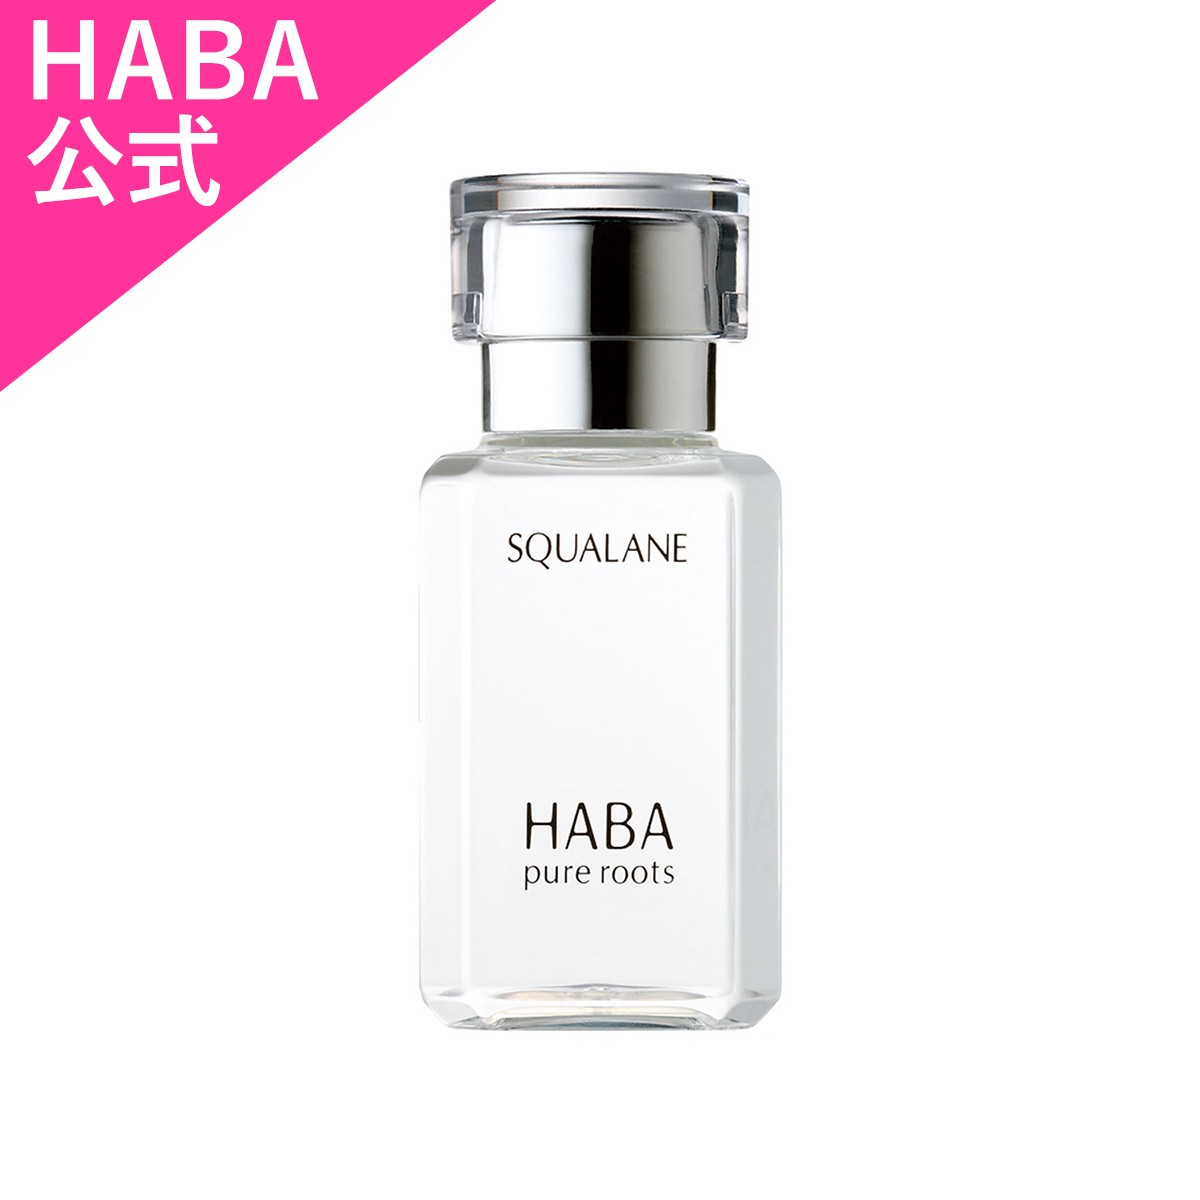 HABA Haba official height goods [ squalene ] 30mL( beauty oil )